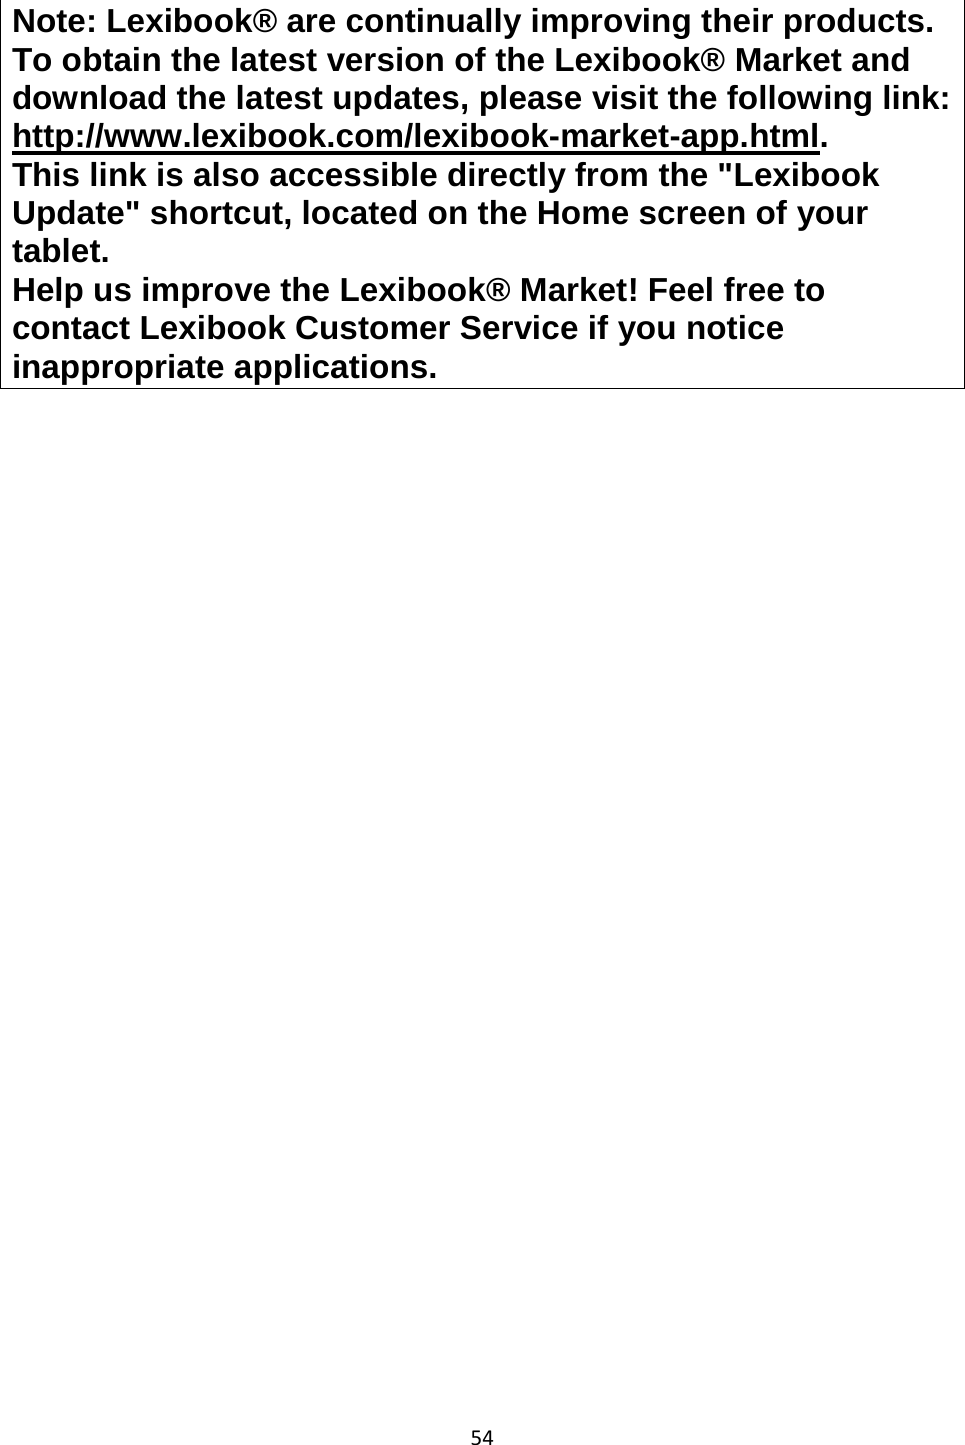 54  Note: Lexibook® are continually improving their products. To obtain the latest version of the Lexibook® Market and download the latest updates, please visit the following link: http://www.lexibook.com/lexibook-market-app.html.  This link is also accessible directly from the &quot;Lexibook Update&quot; shortcut, located on the Home screen of your tablet. Help us improve the Lexibook® Market! Feel free to contact Lexibook Customer Service if you notice inappropriate applications. 